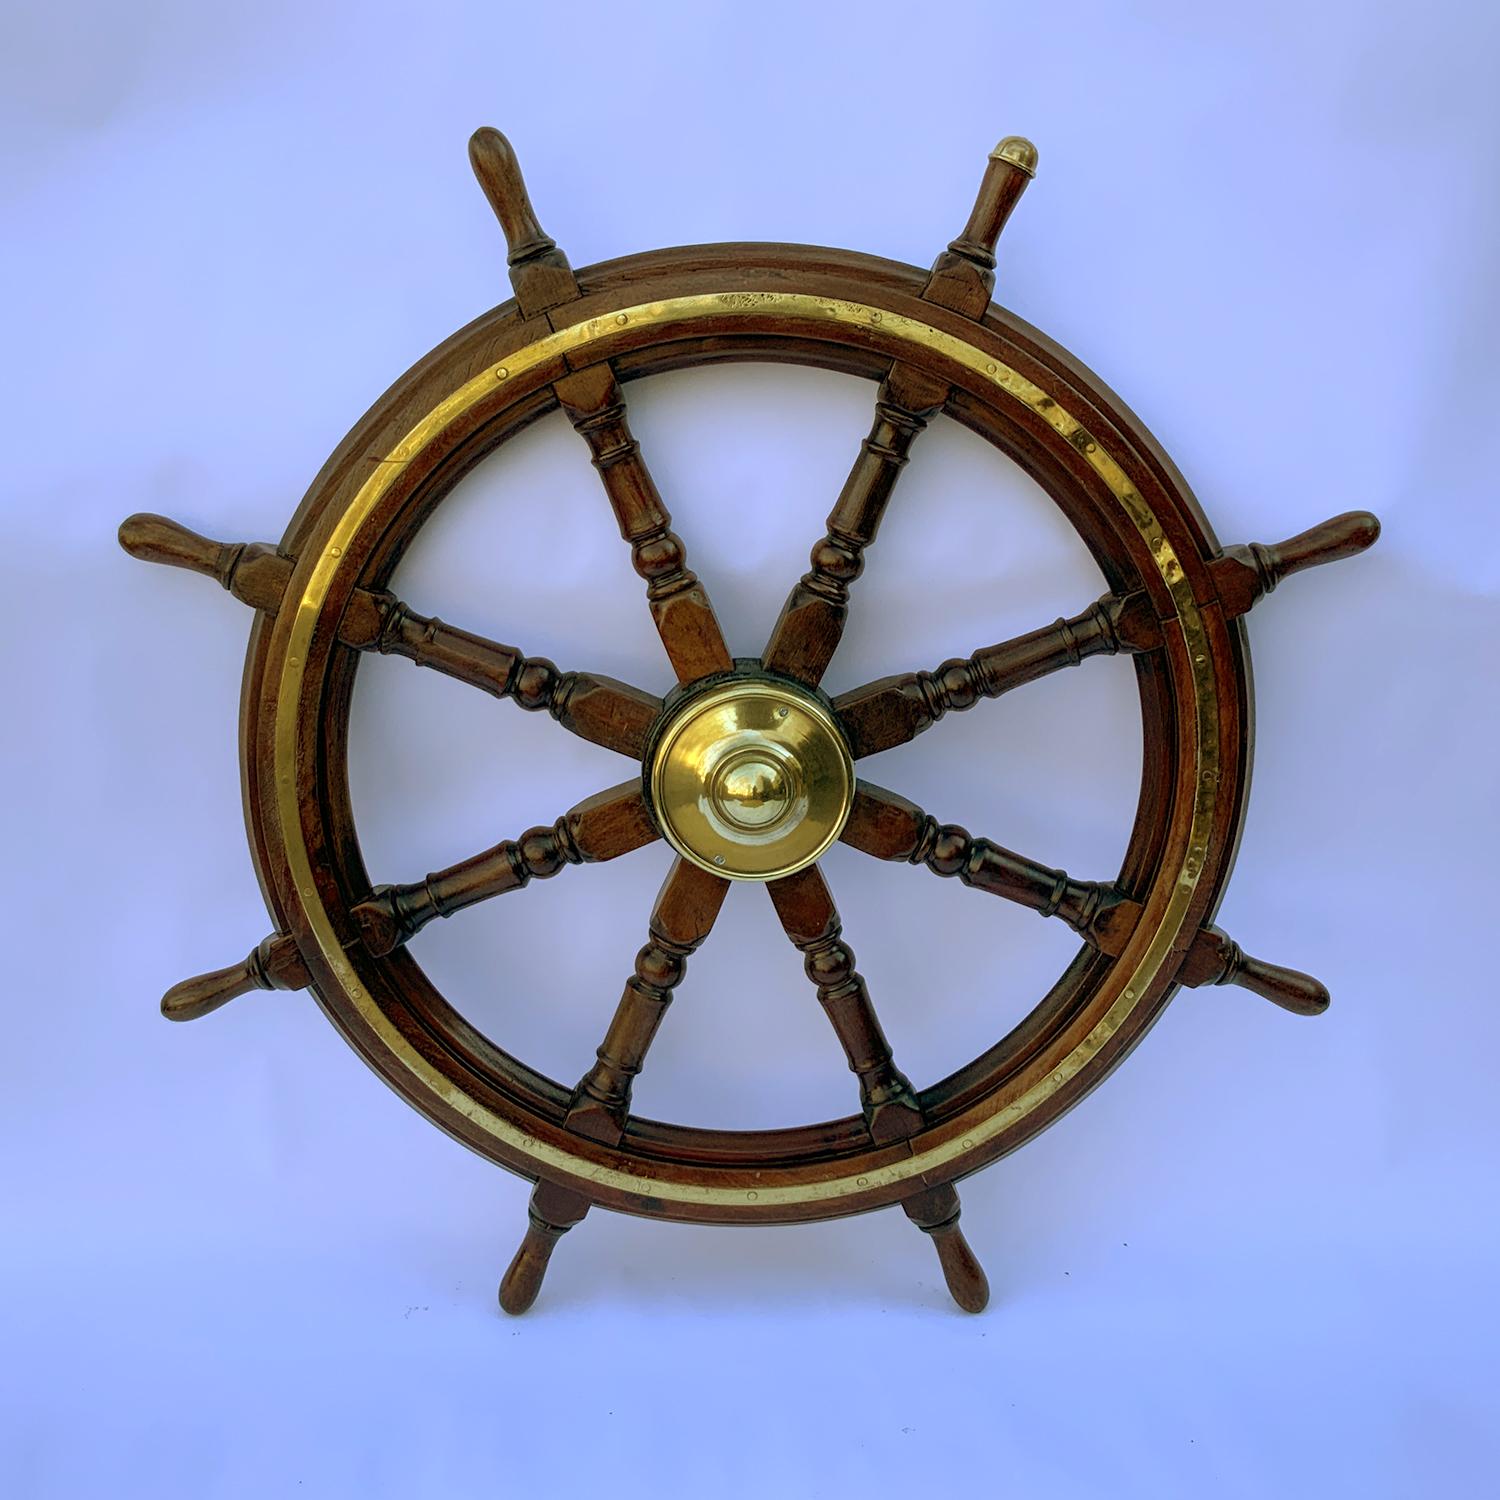 Eight spoke varnished wood ship's wheel with brass hub and brass trim ring. The brass hub cap is mounted to an iron hub. Warm patina on this maritime relic. Circa 1910. American made. Quite heavy.